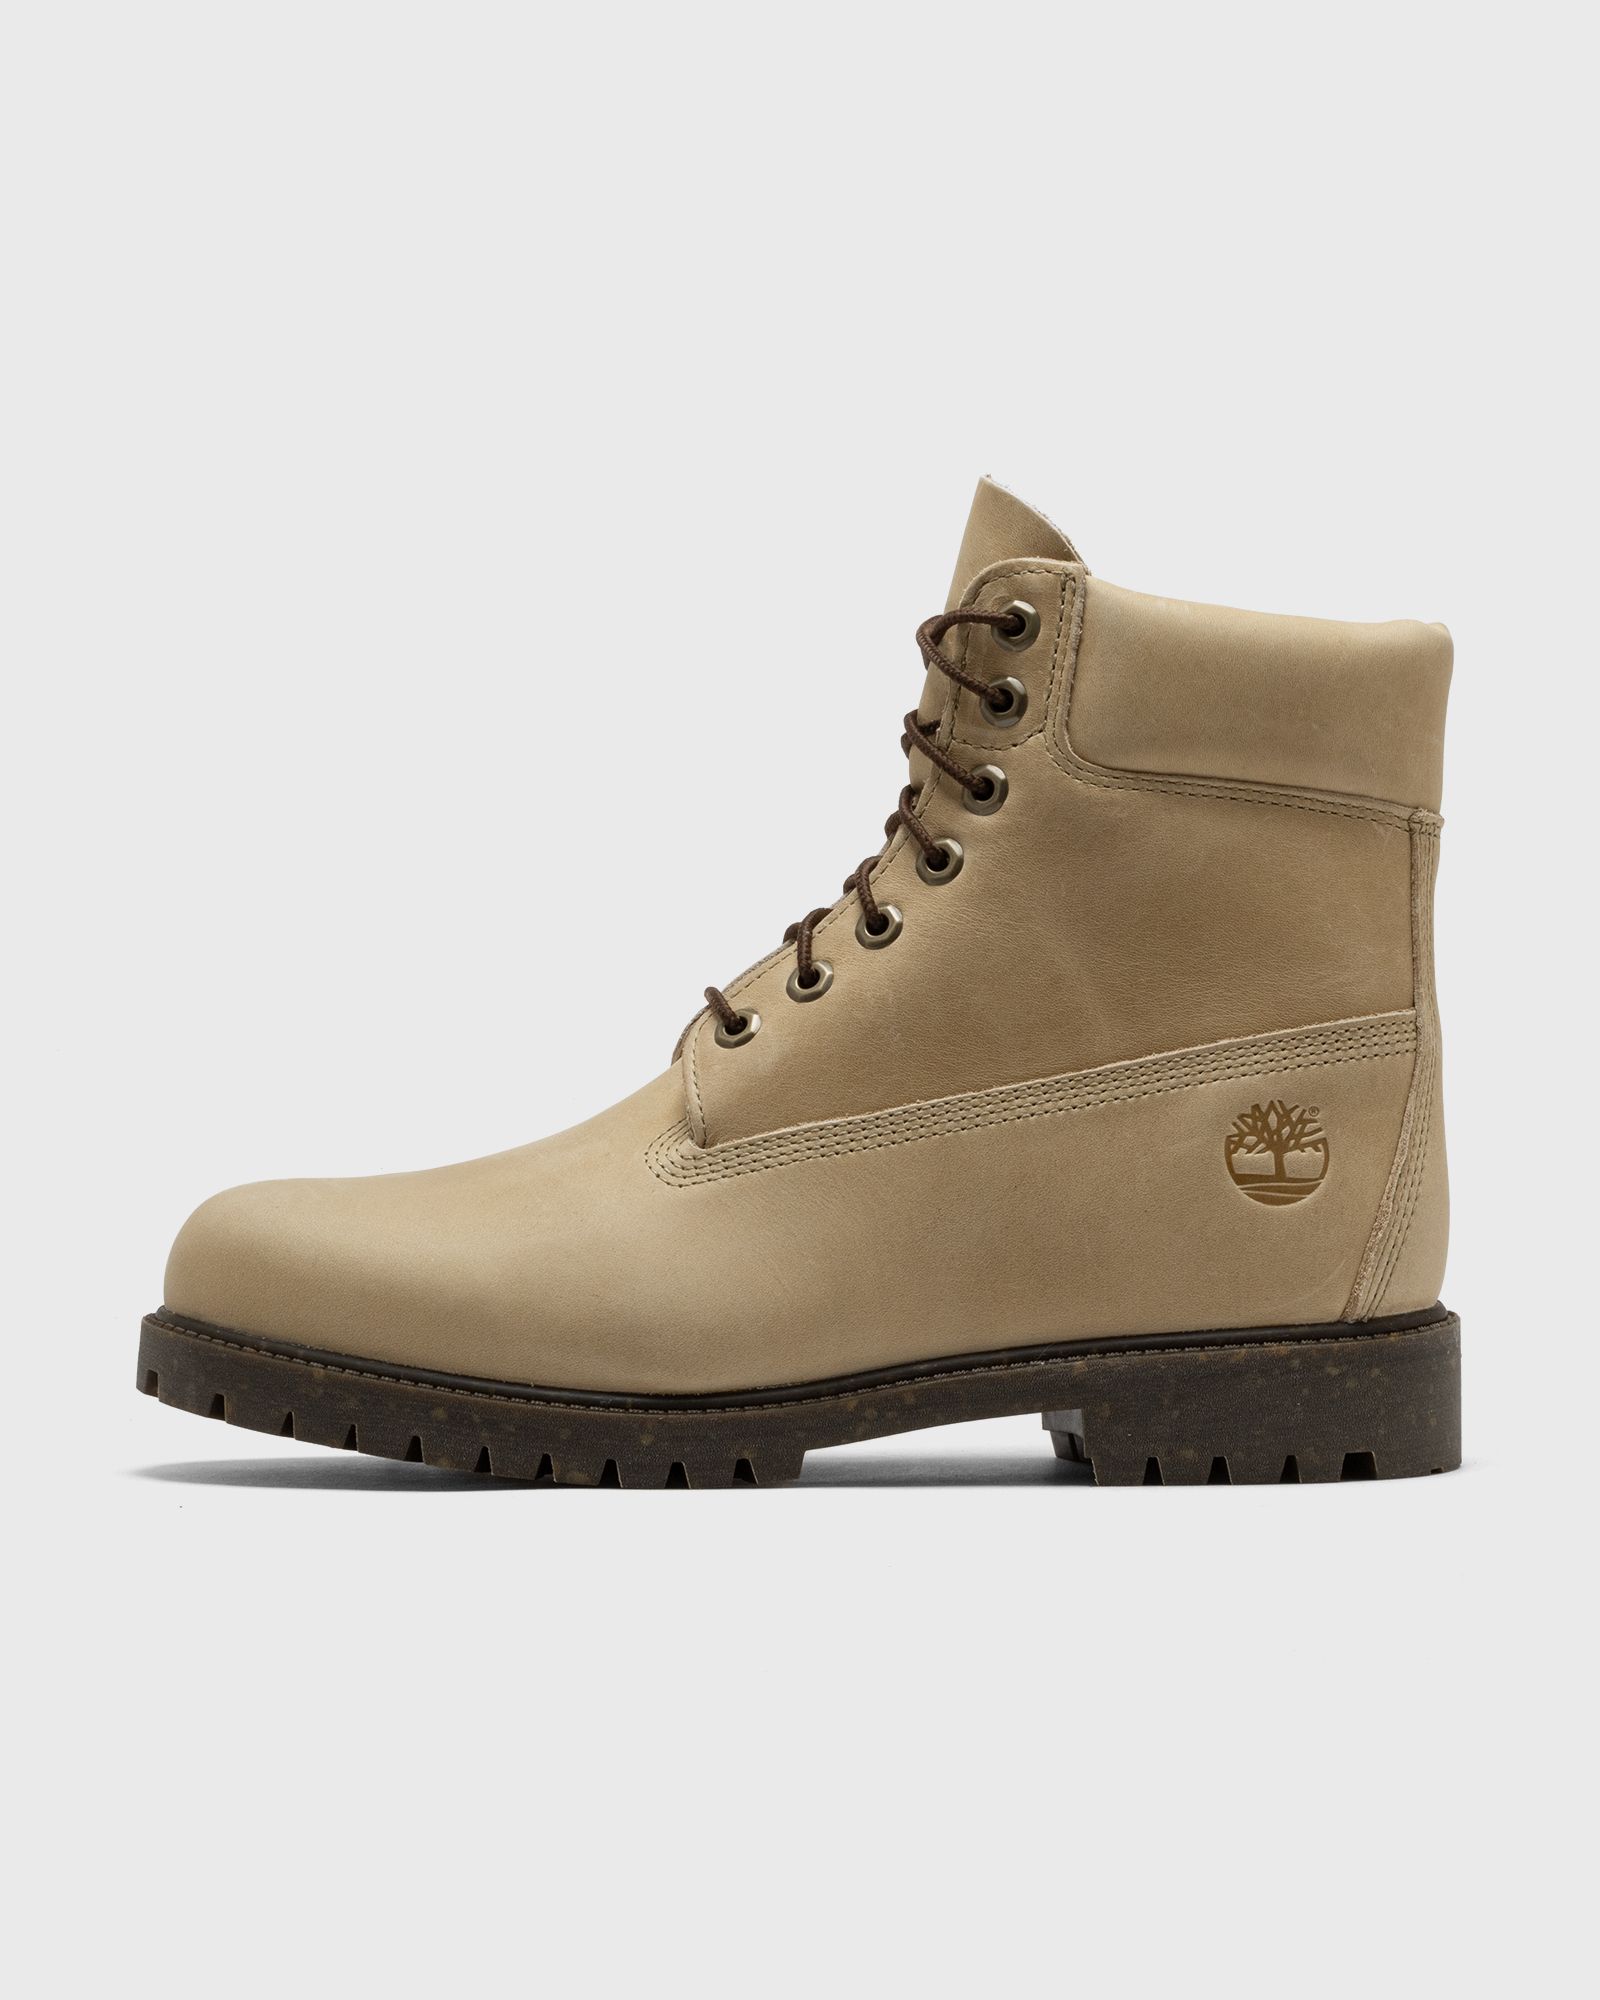 Timberland - heritage 6 inch lace up waterproof boot men boots beige in größe:41